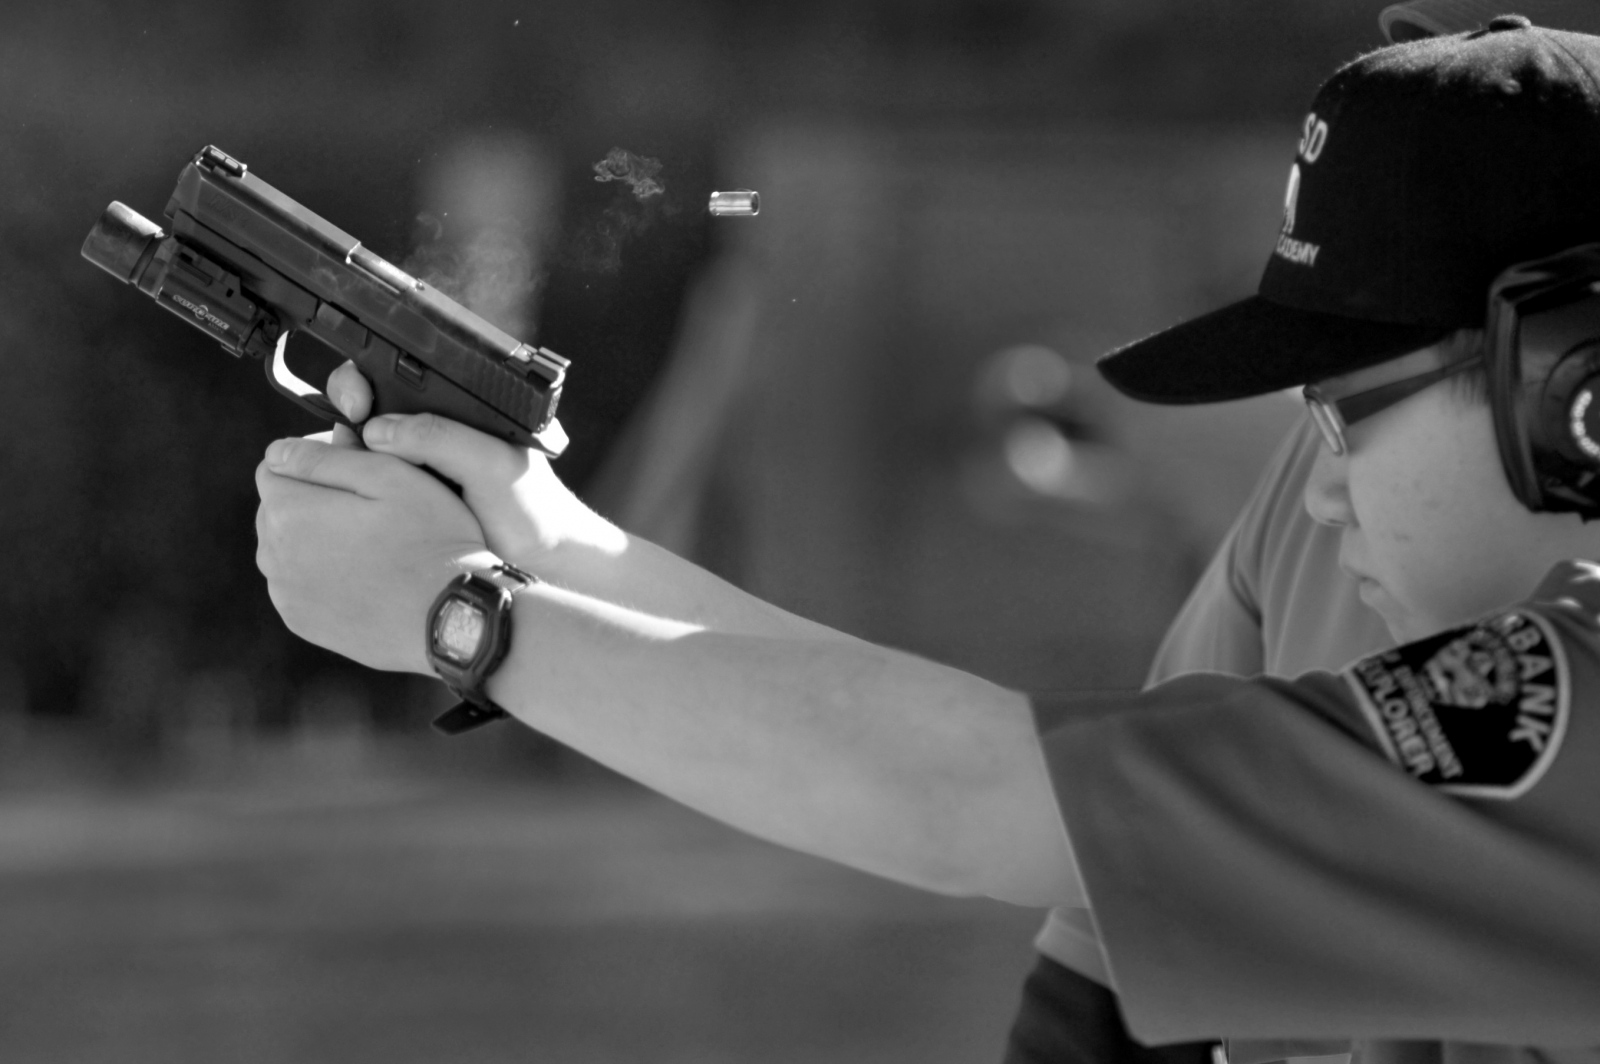 A recruit fires a 9mm handgun under supervision of a deputy sheriff at the shooting range at...